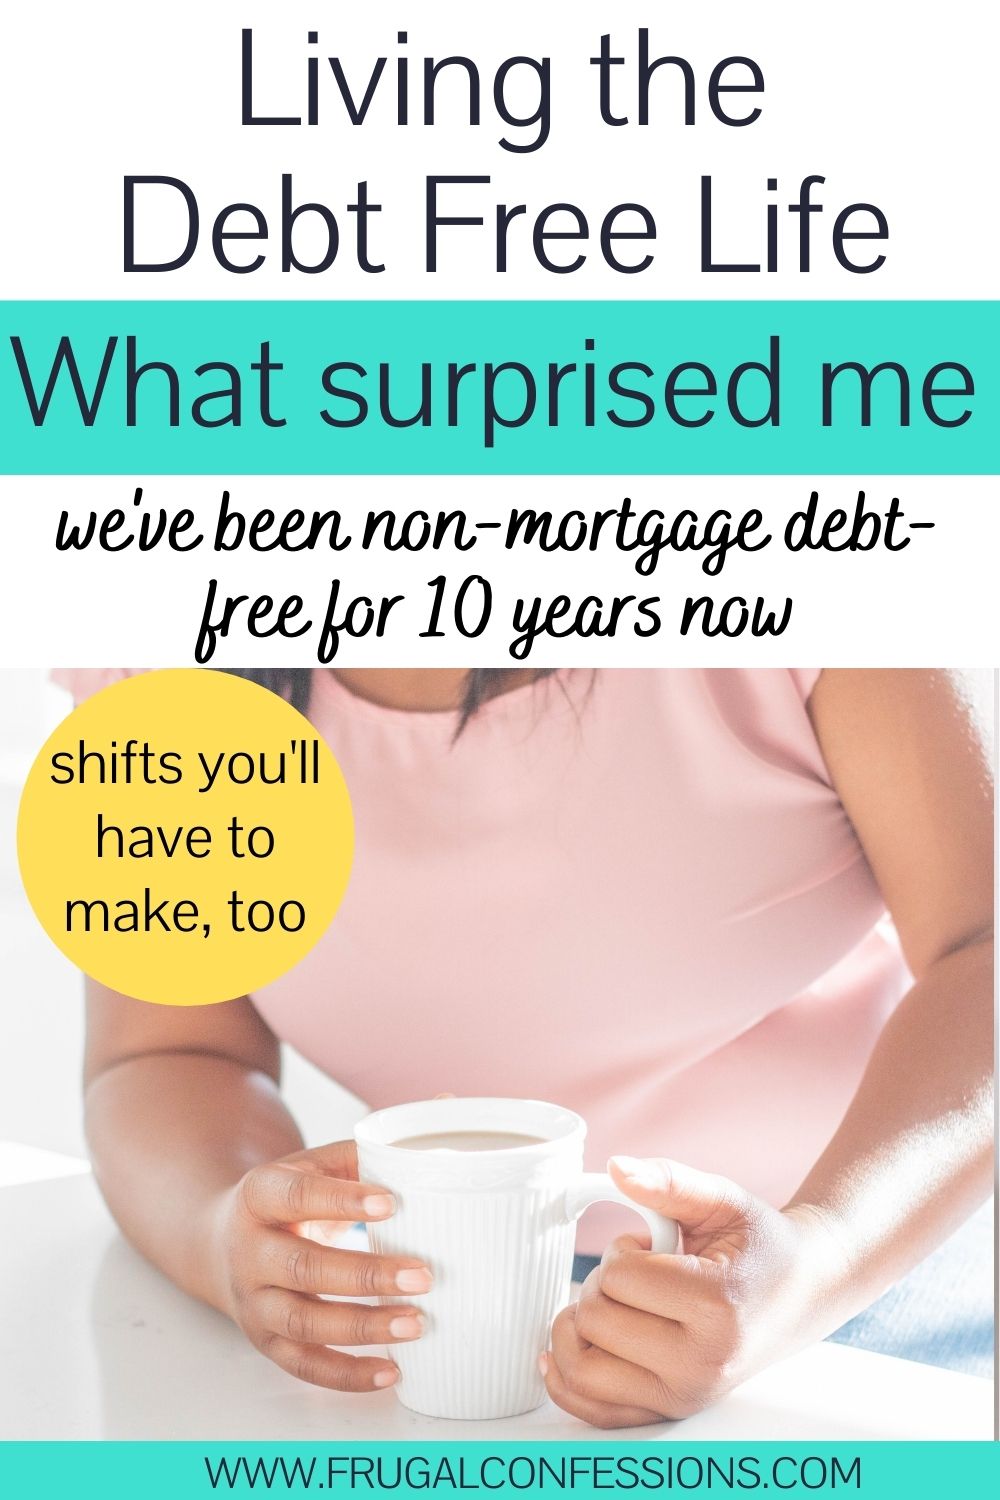 woman in pink shirt holding coffee mug, text overlay "living the debt free life - what surprised me"